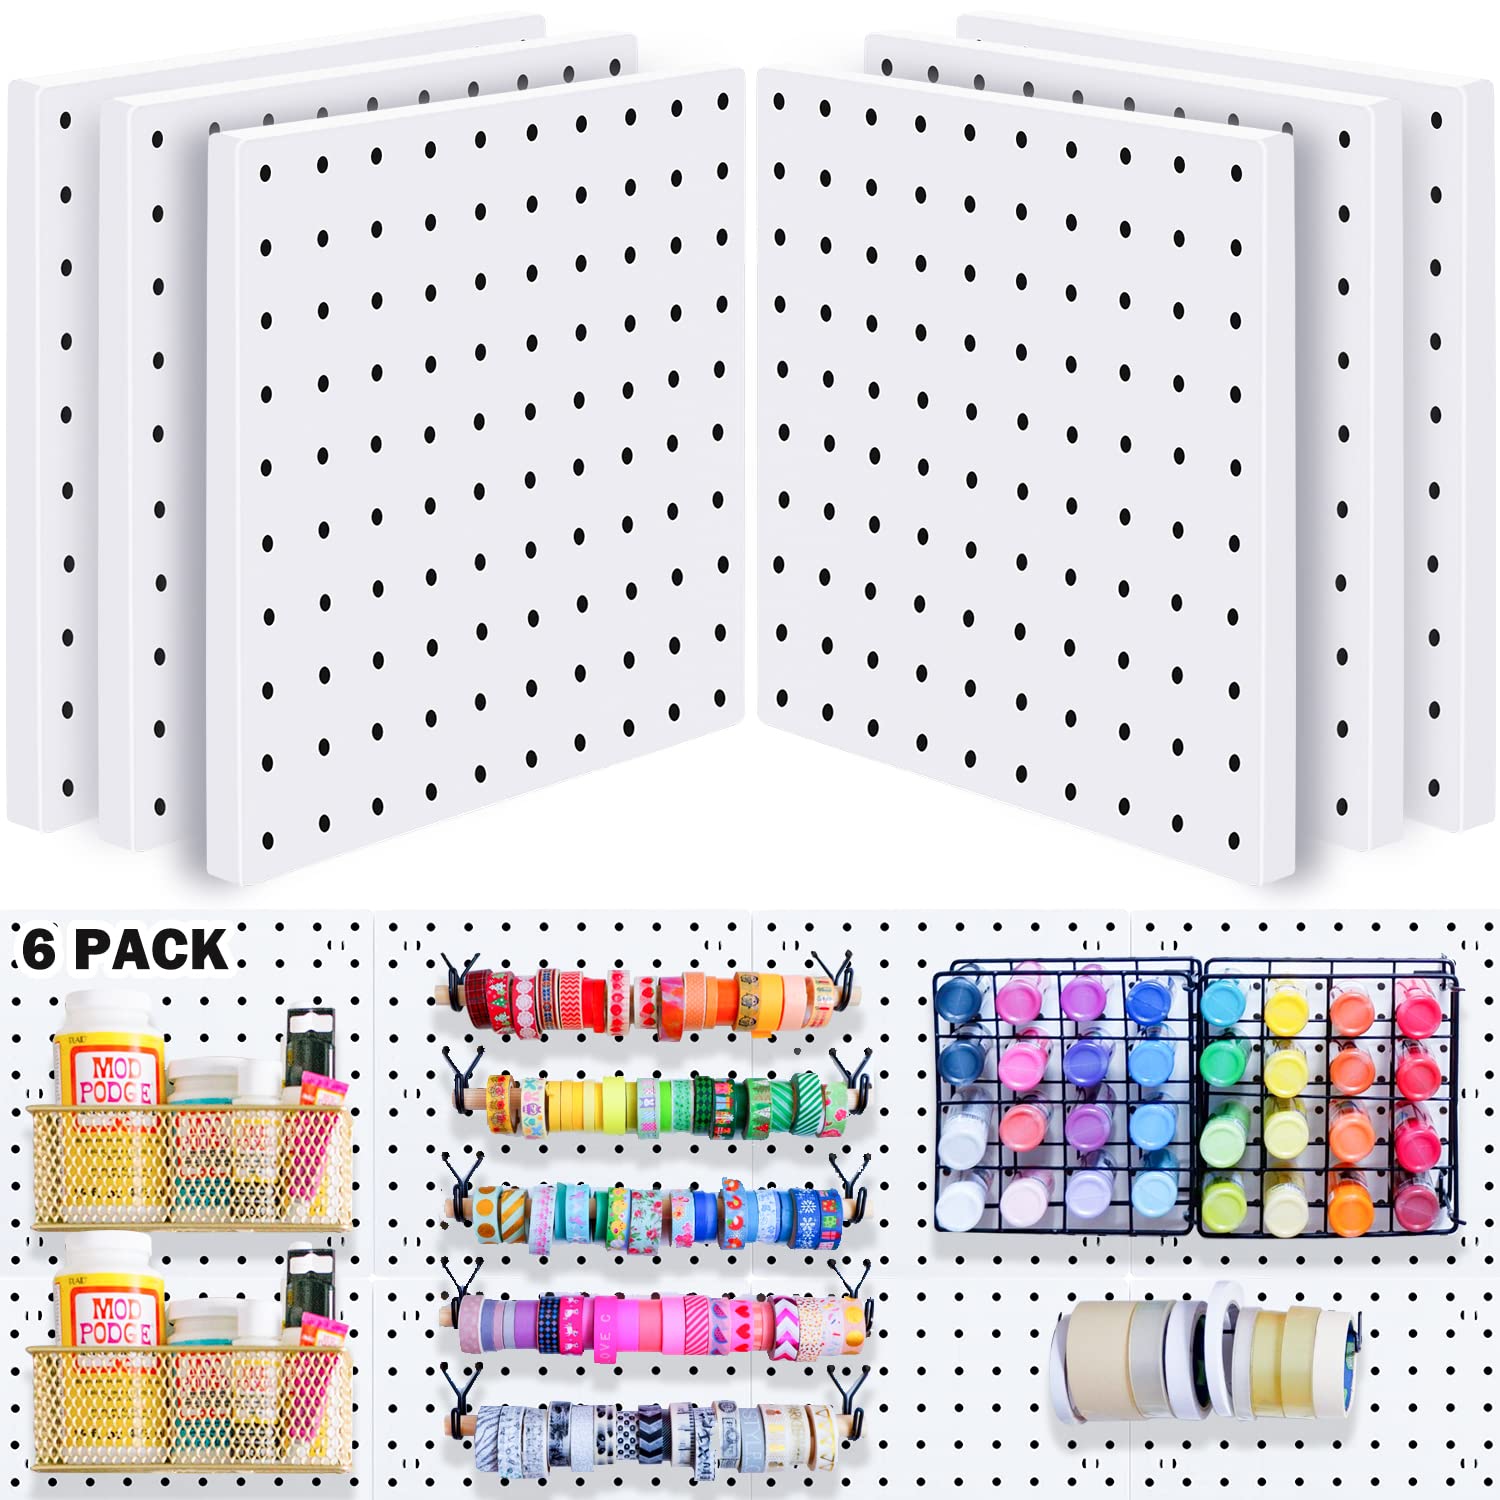 SKYFOOST 6Pcs Pegboard, Pegboard Wall Organizer, Mount Display Pegboard Kits fit Pegboard Organizer and Storage, Small Pegboard for craft